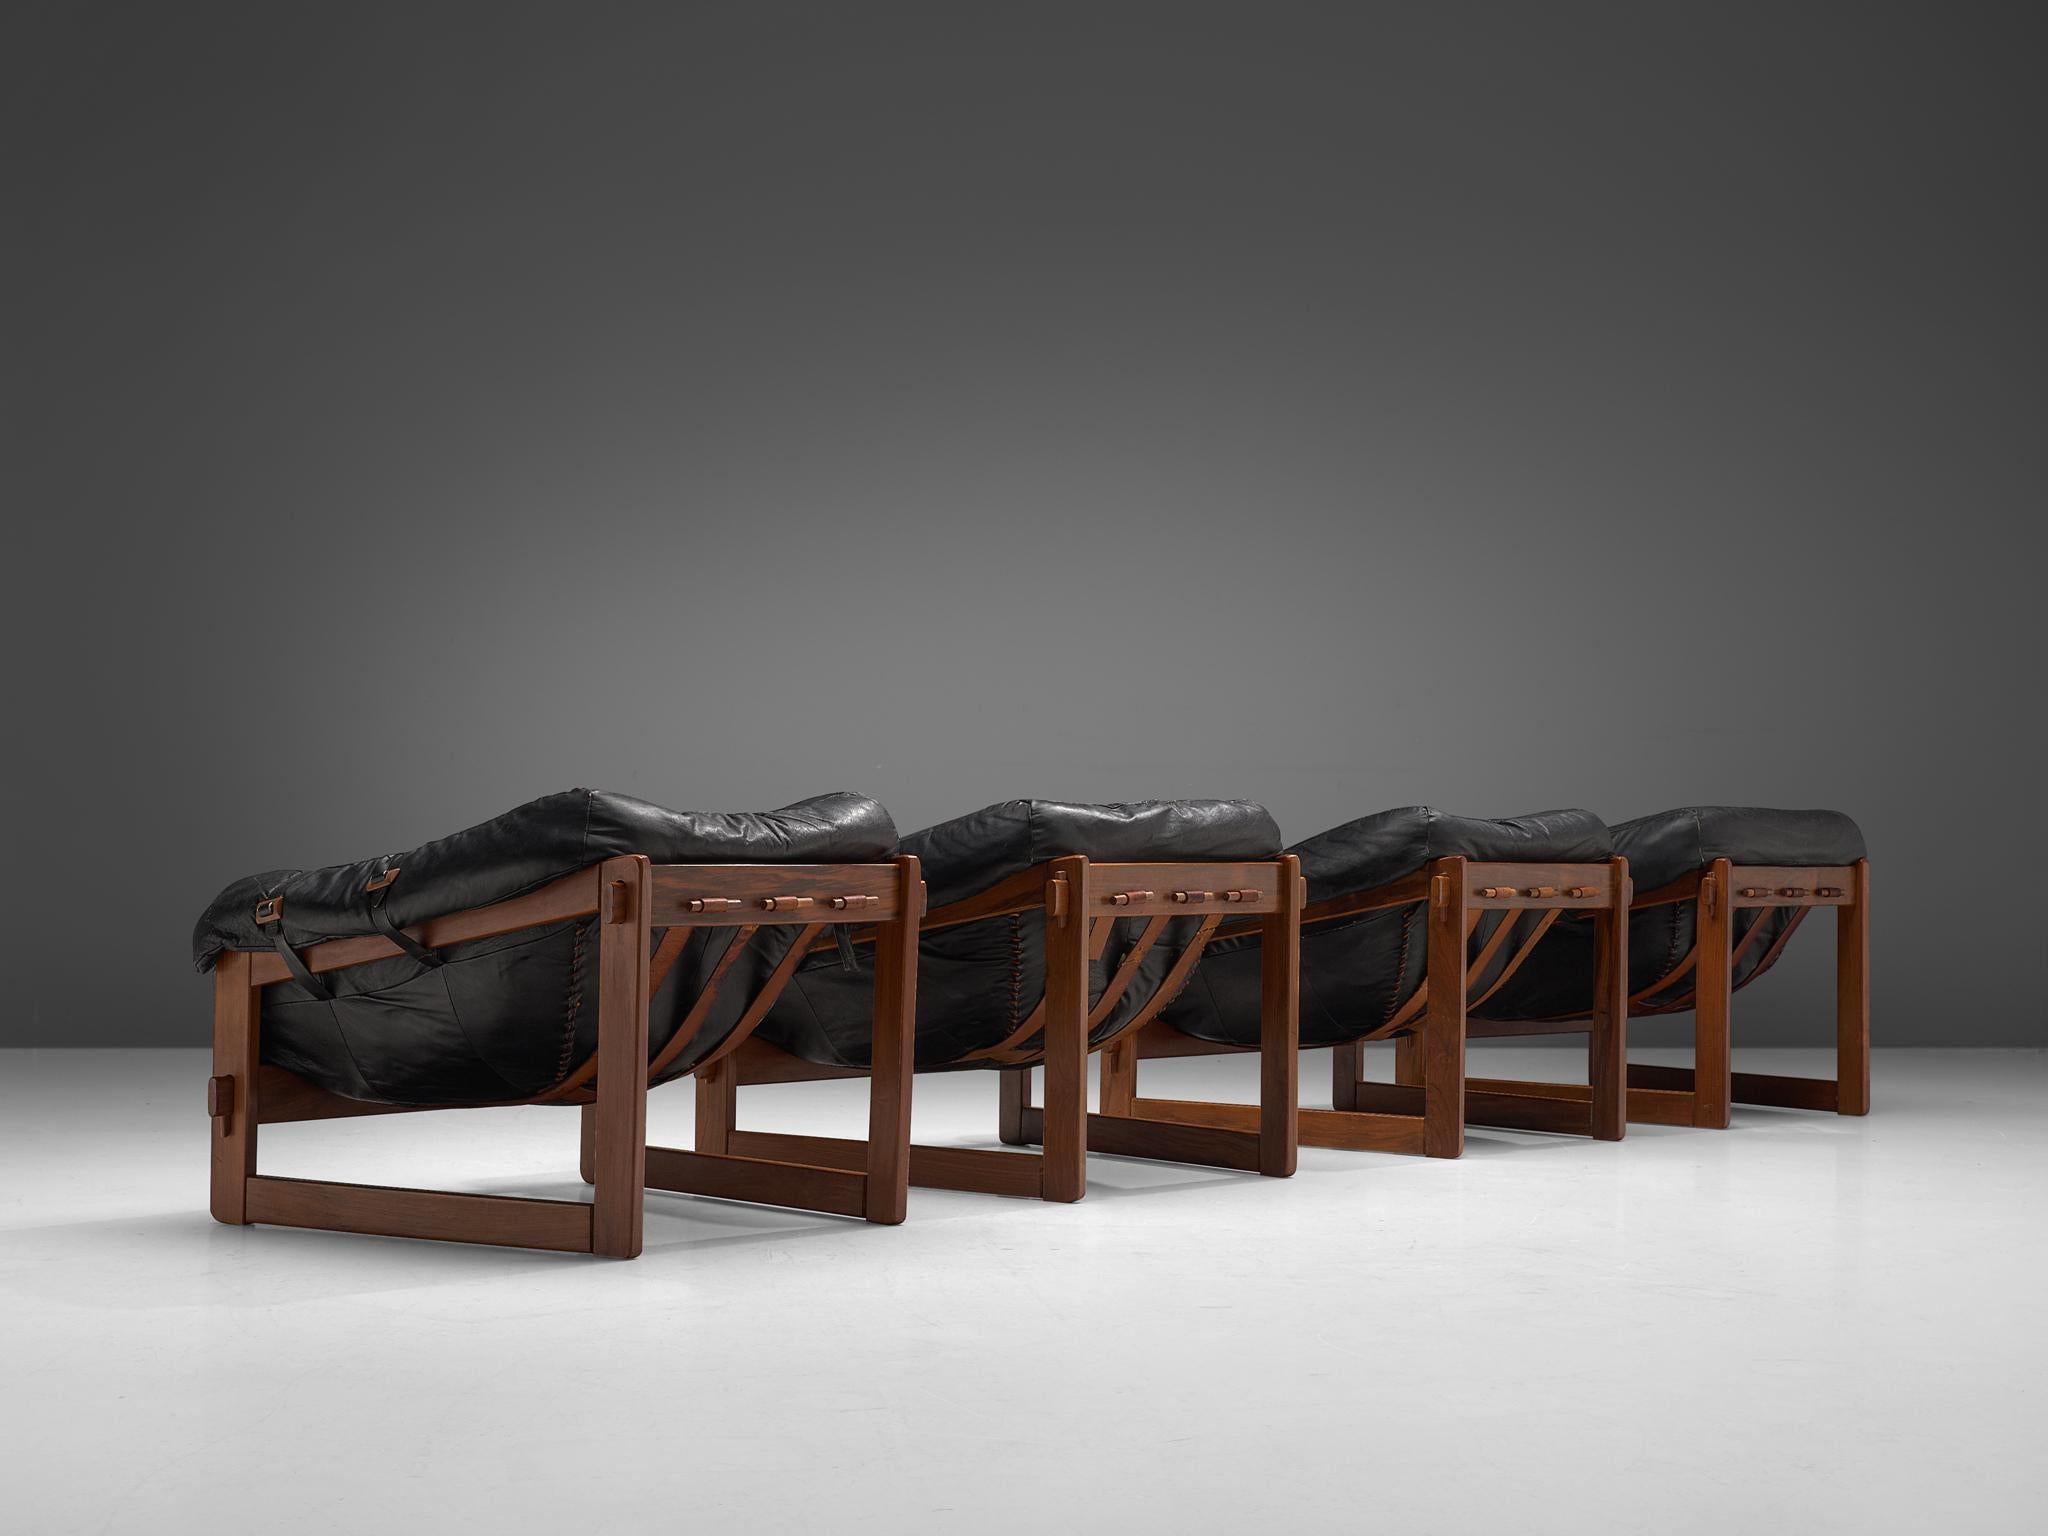 Brazilian Set of Four Lounge Chairs in Original Black Leather by Percival Lafer